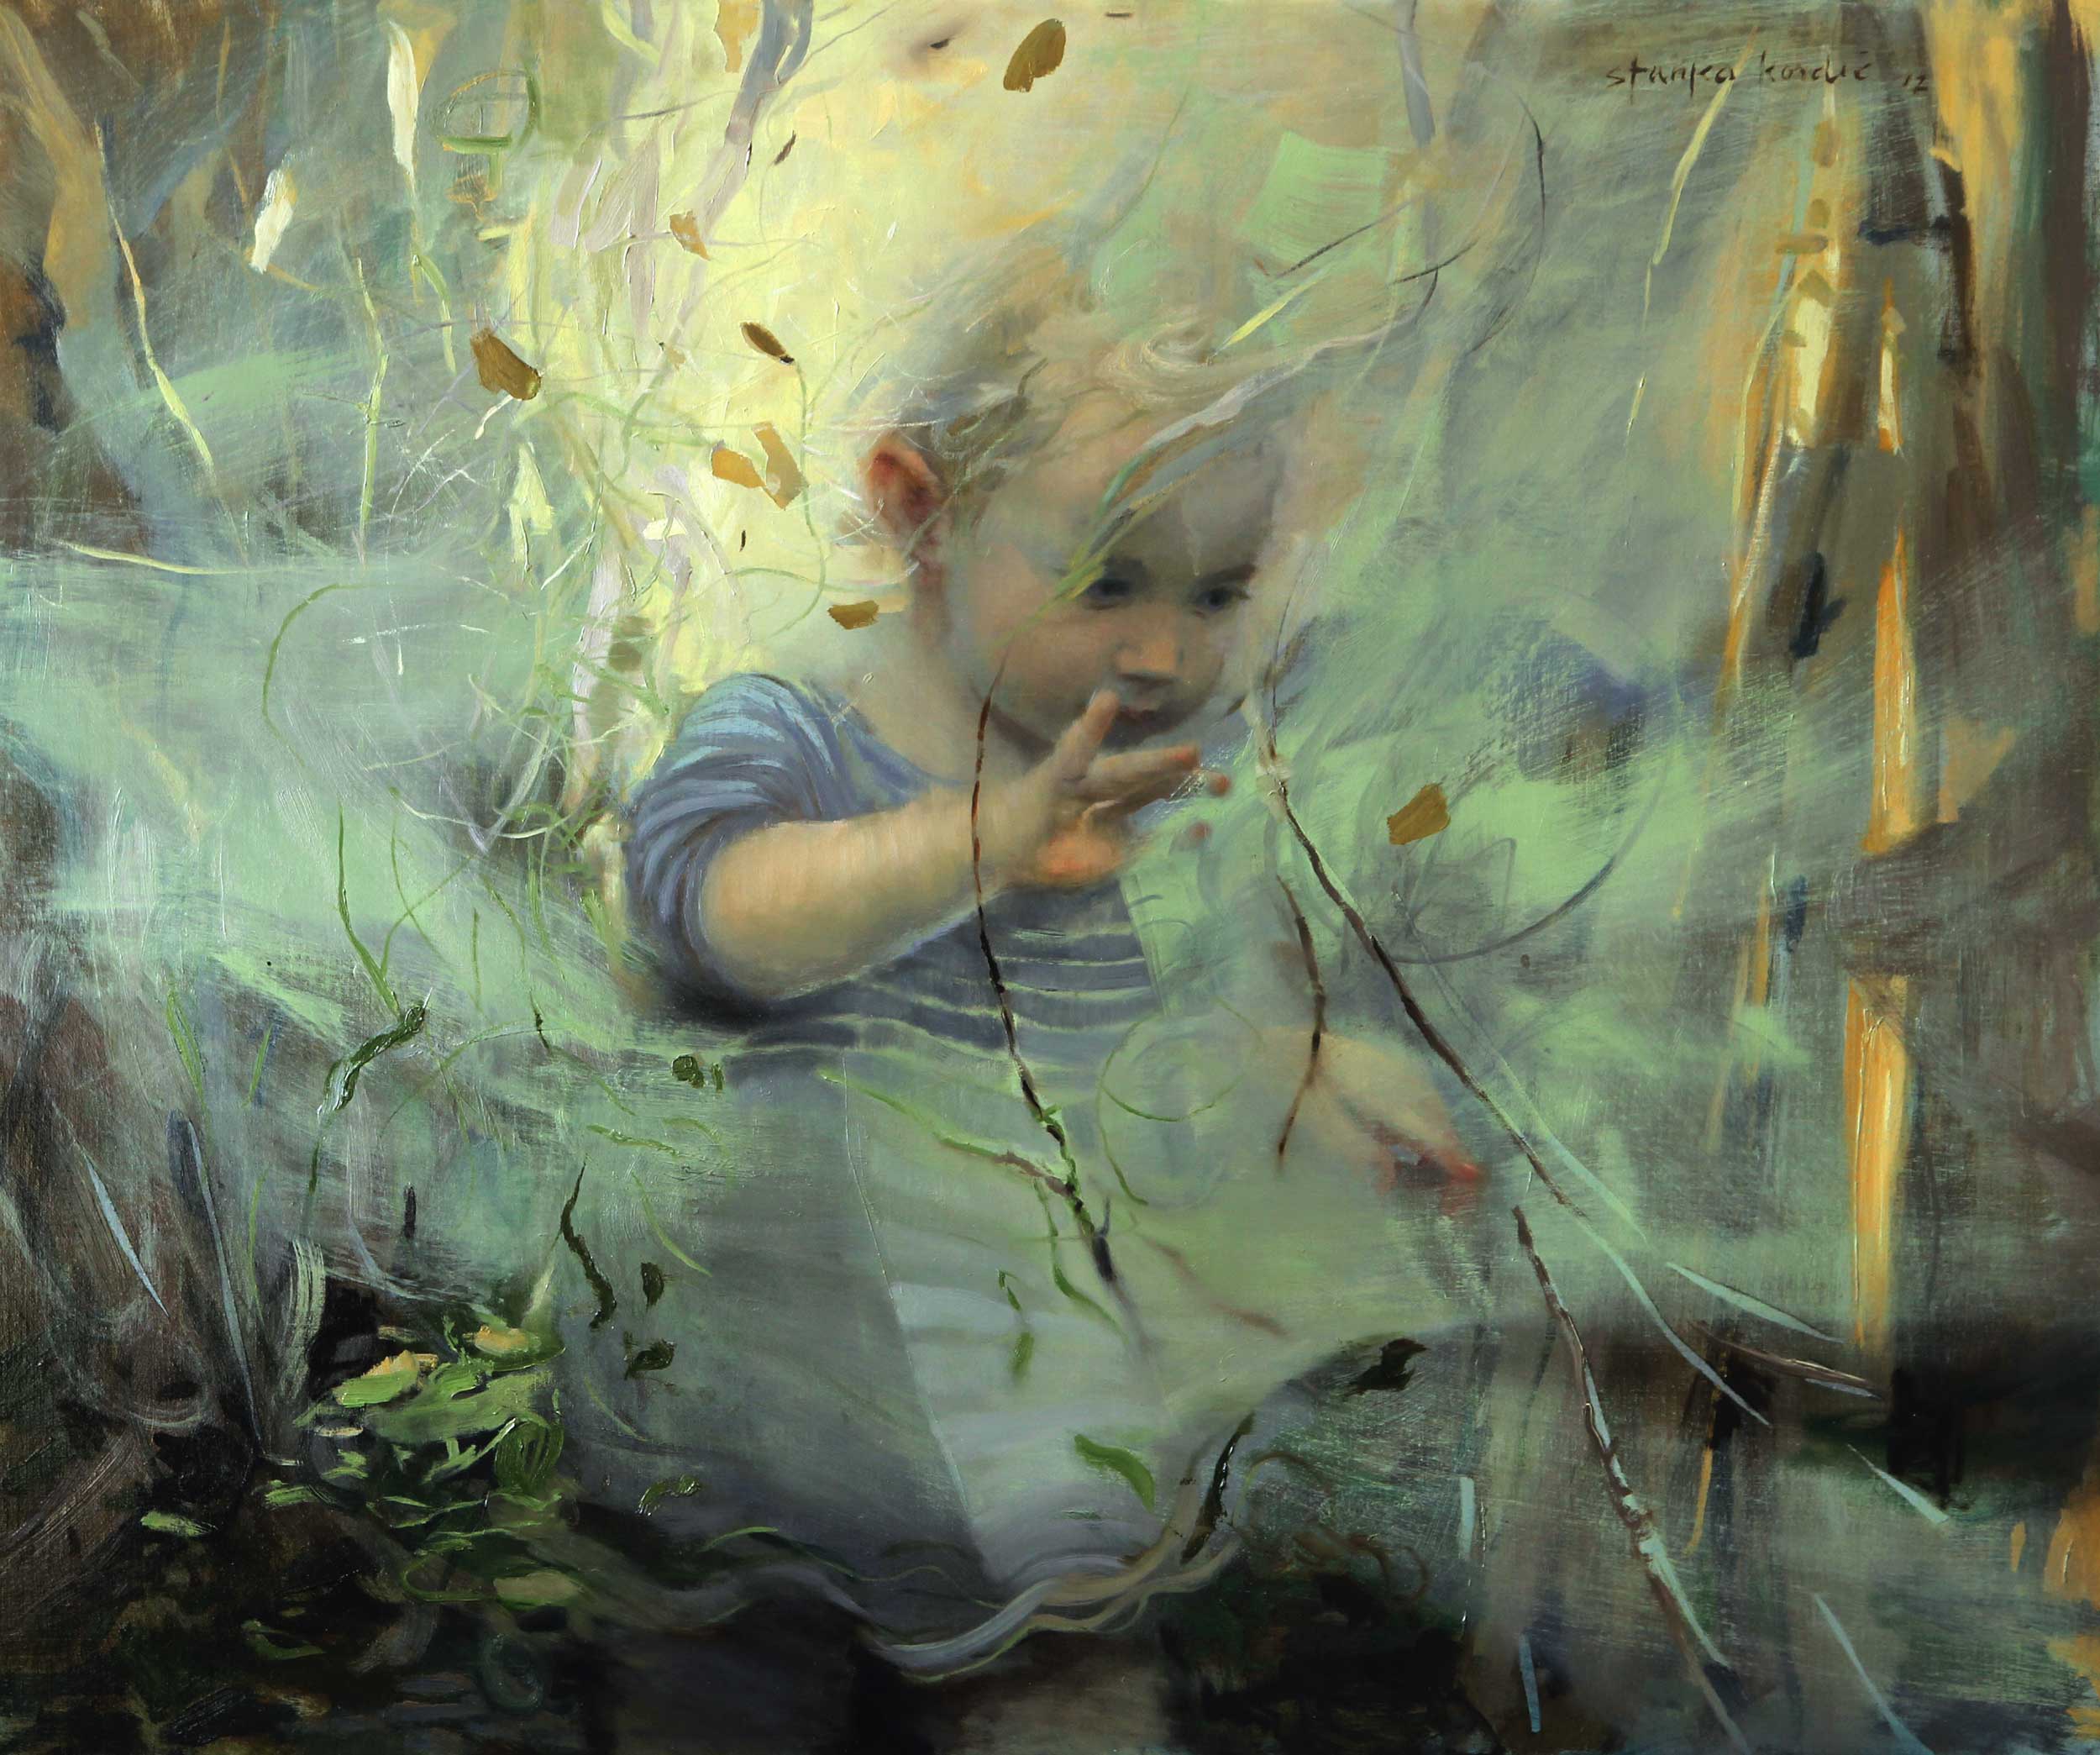 Stanka Kordic, "Boundless," 30 x 36 inches, Oil on linen